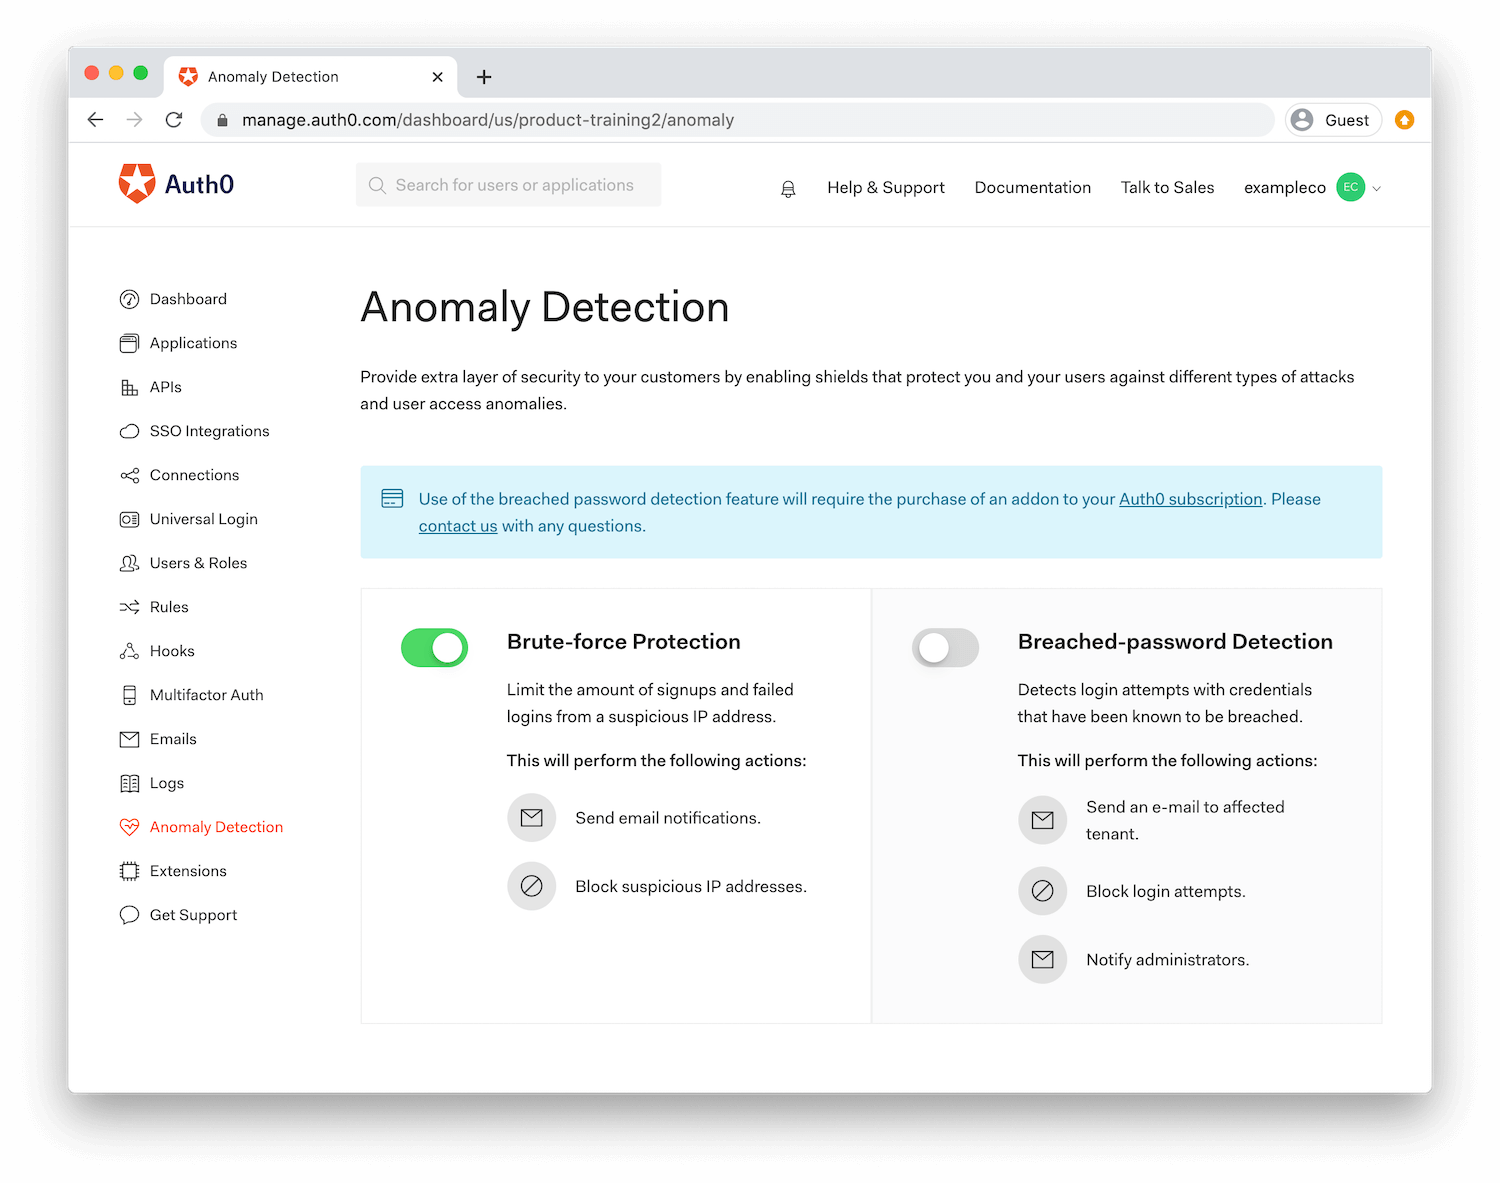 Auth0's Anomaly Detection dashboard